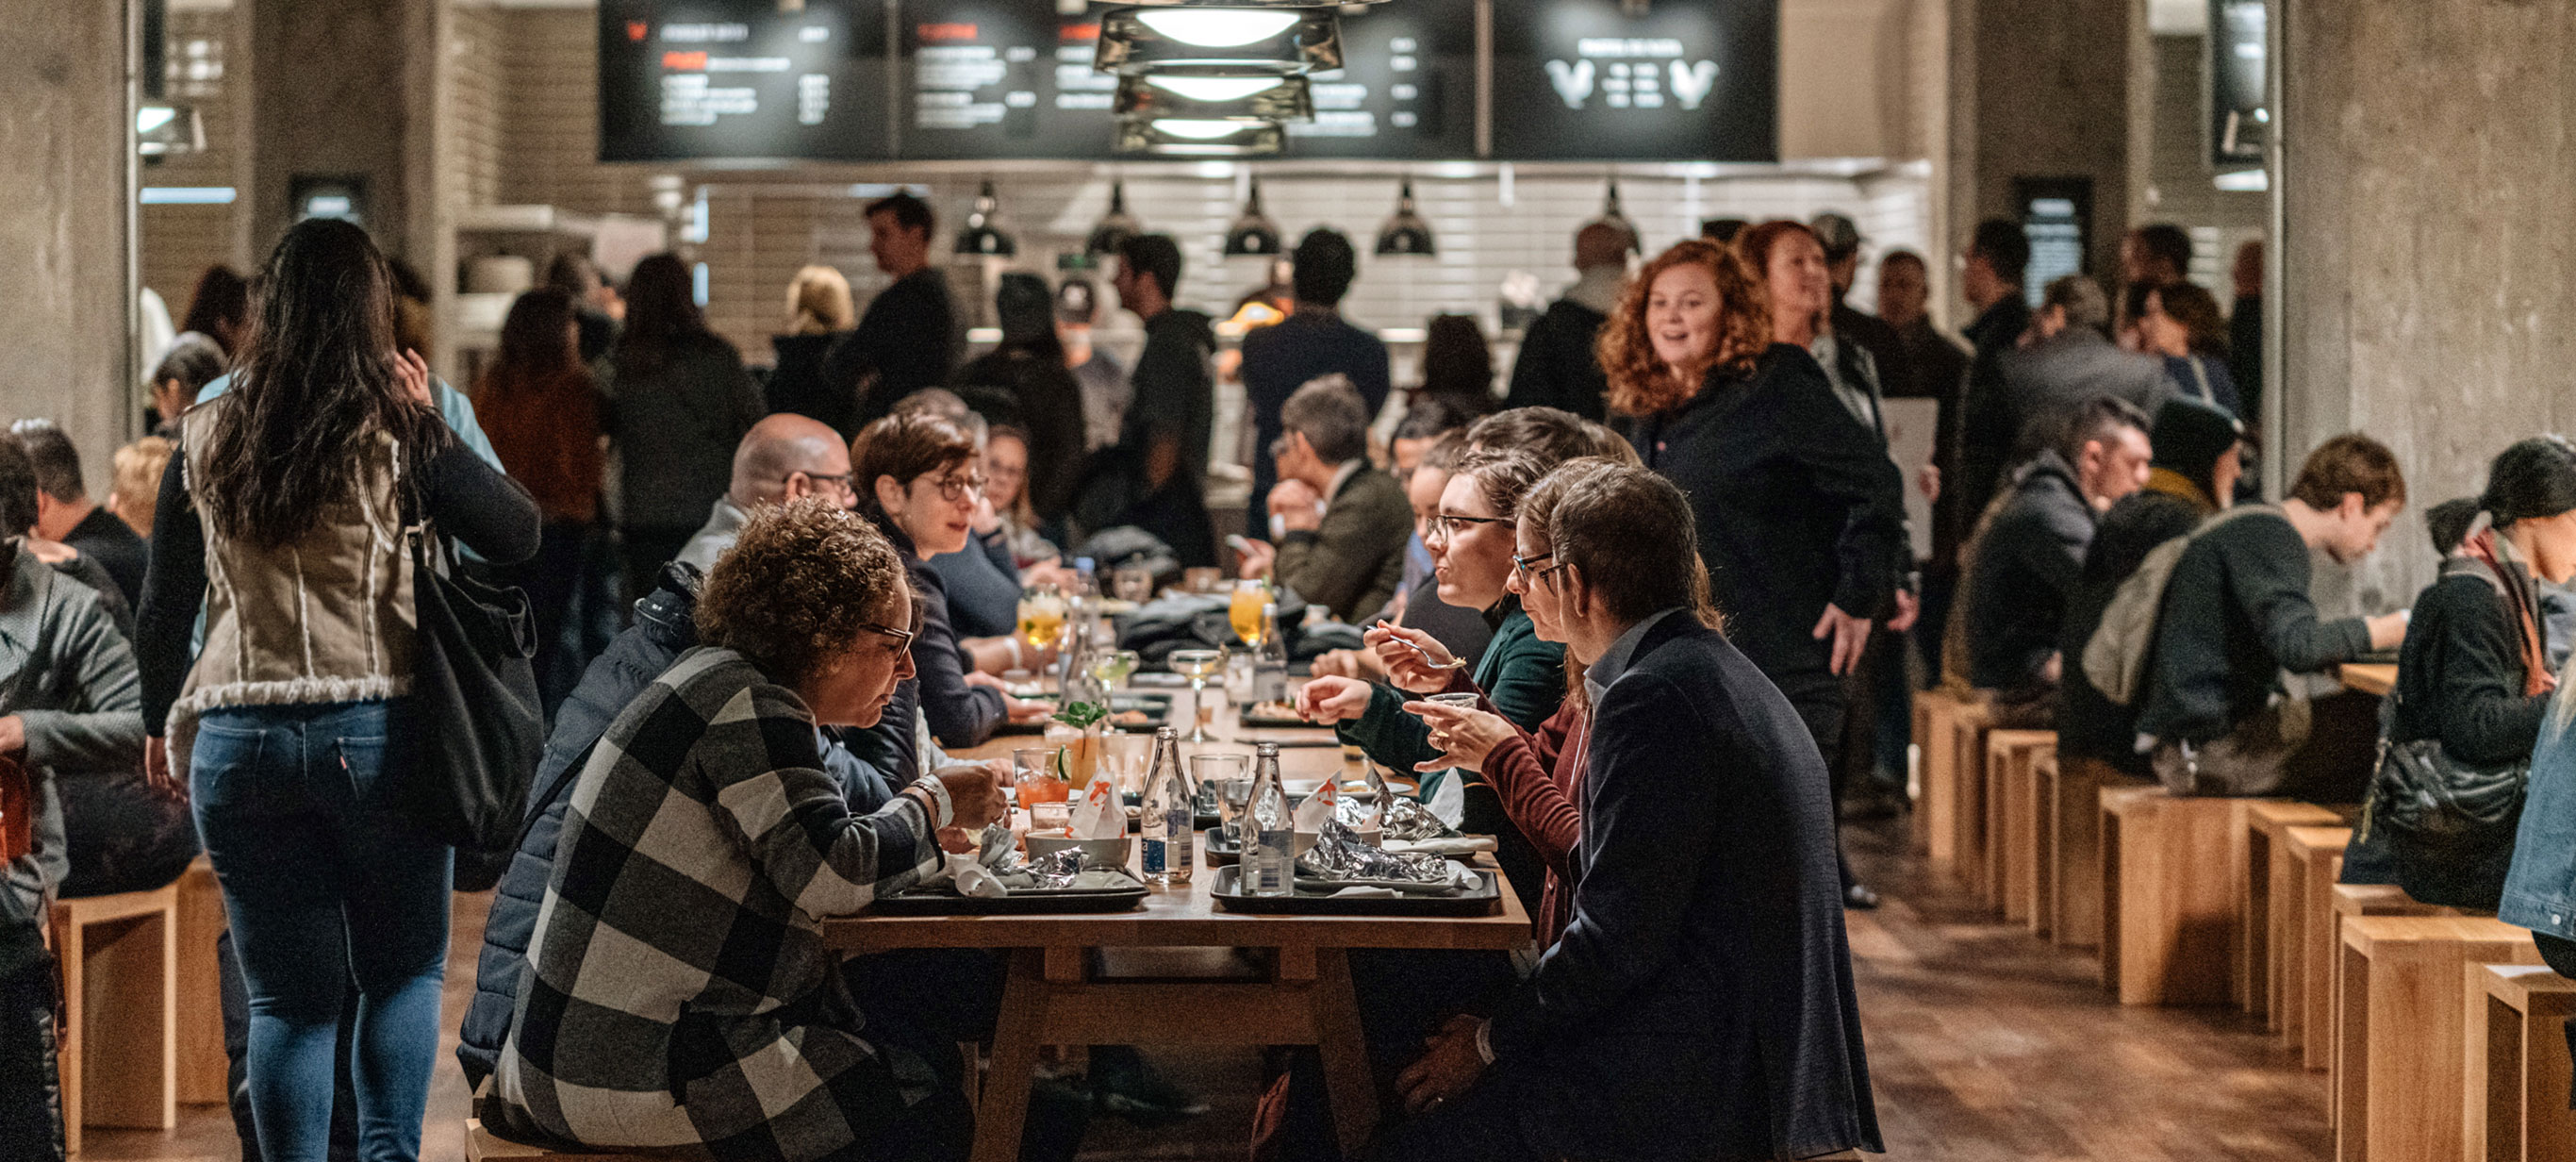 Scene of people eating at a communal table in Time Out Market Montreal